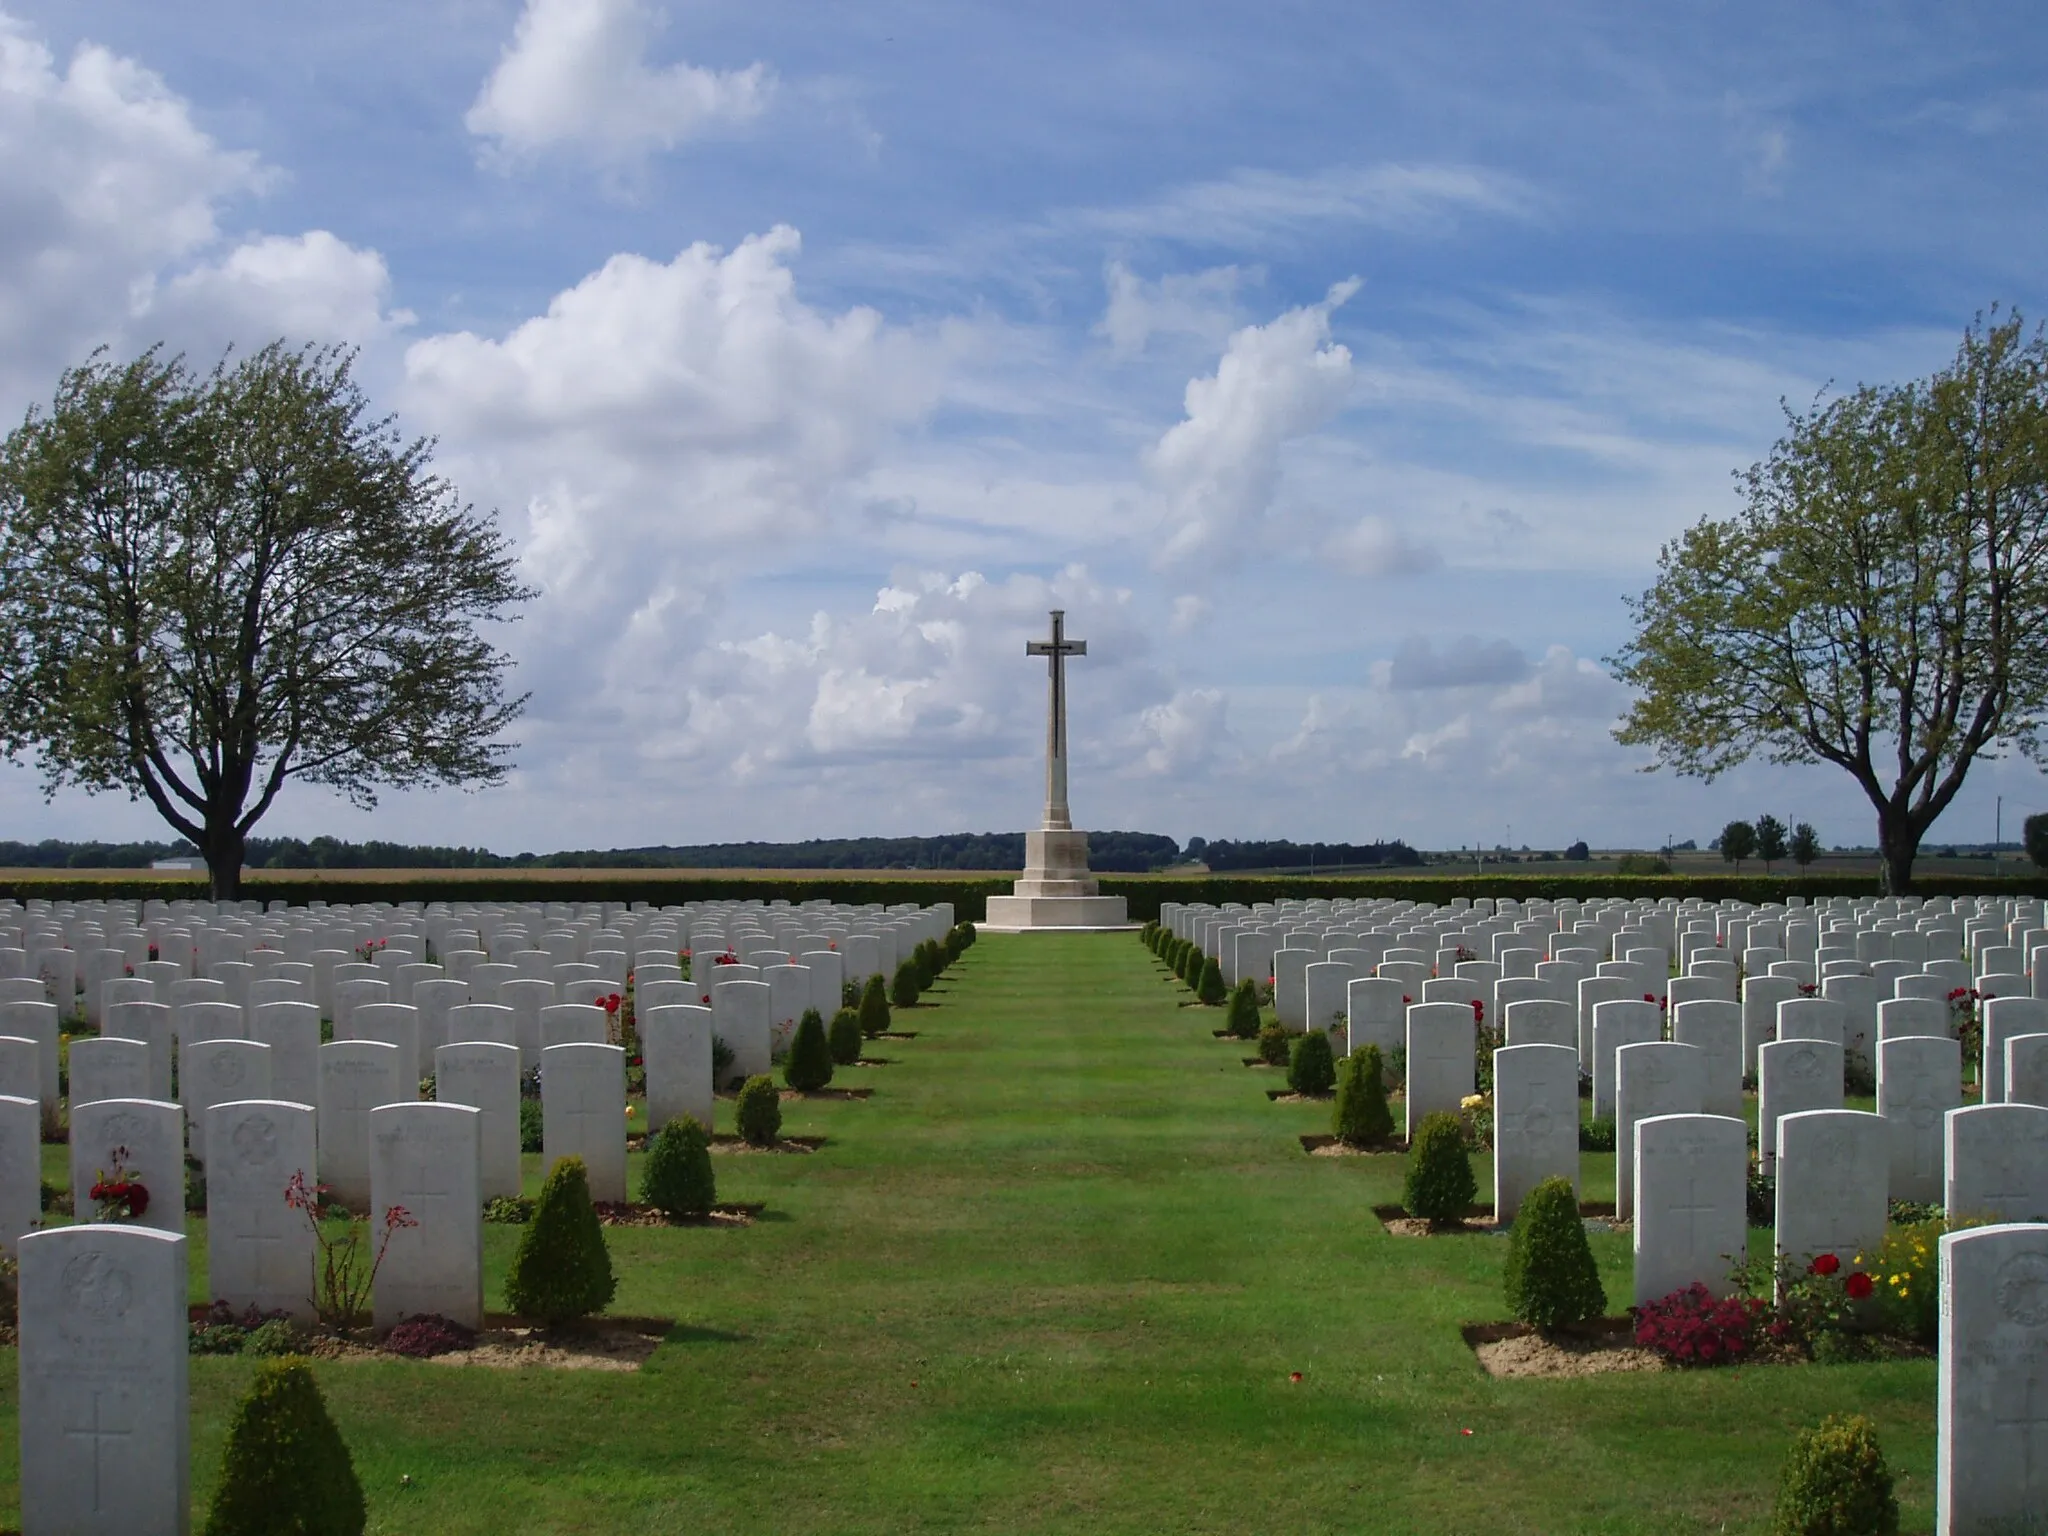 Photo showing: Part of a set of photographs of Caterpillar Valley Cemetery and the New Zealand Memorial to the Missing at this Commonwealth War Graves Commission cemetery, which is located near Longueval, France. This is the view from the central point of the cemetery, looking towards the Cross of Sacrifice.